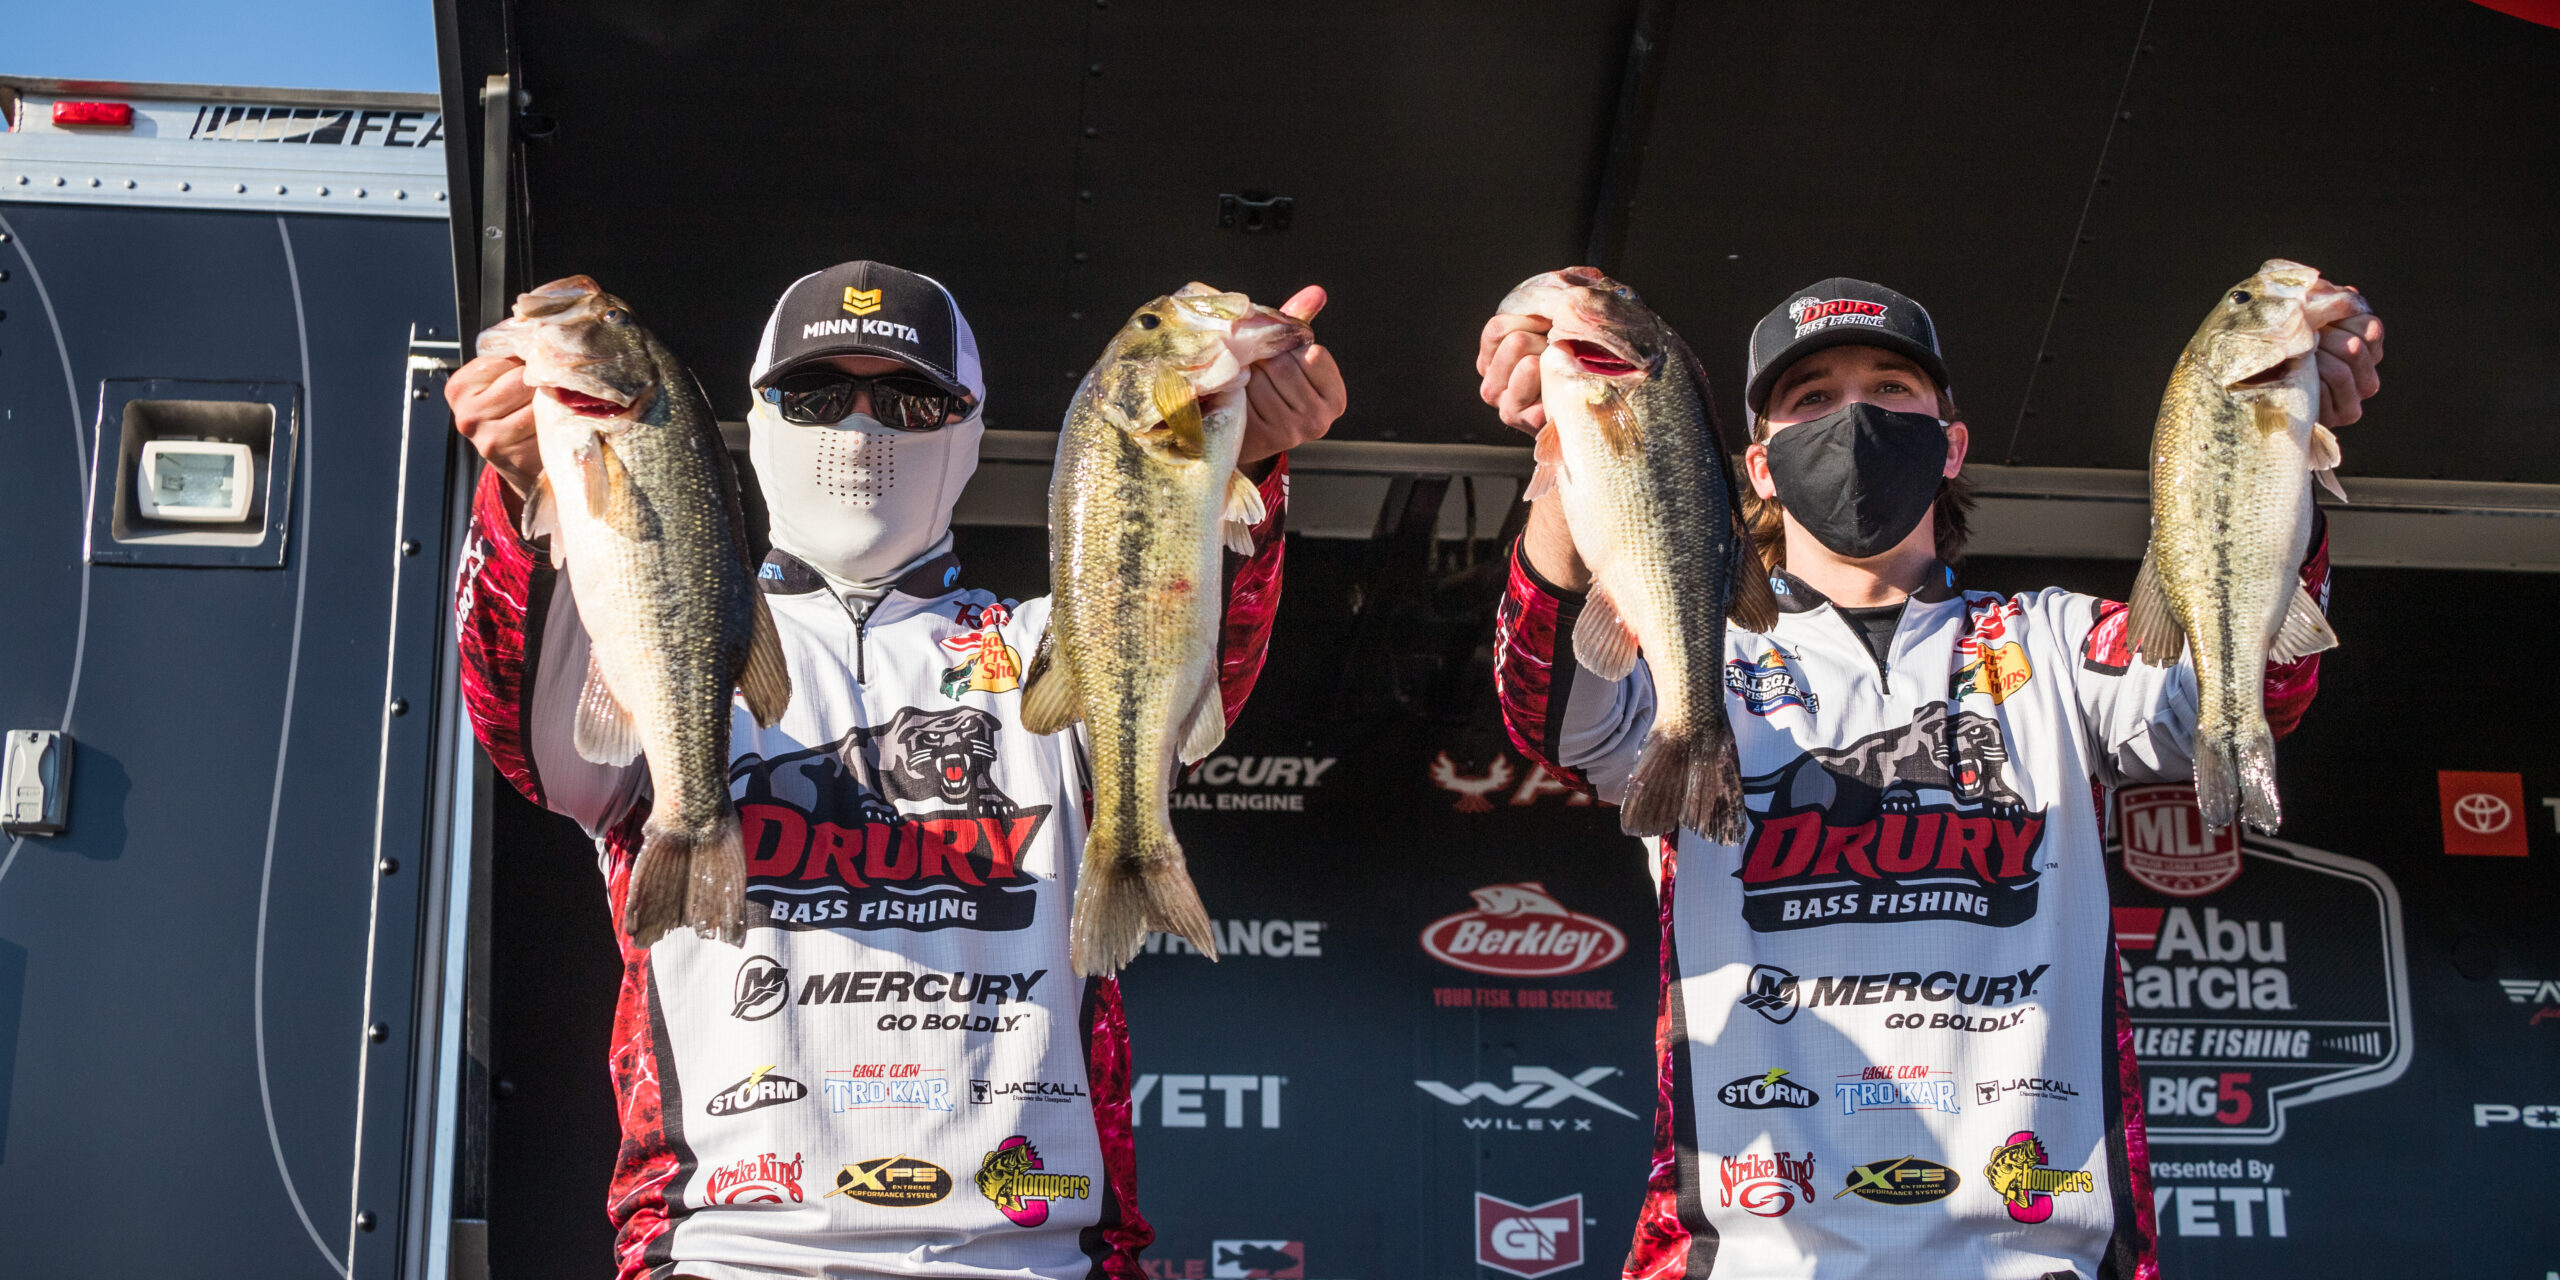 Breeden and Smith of Drury University Lead on Day 1 of the College Fishing  National Championship - Major League Fishing